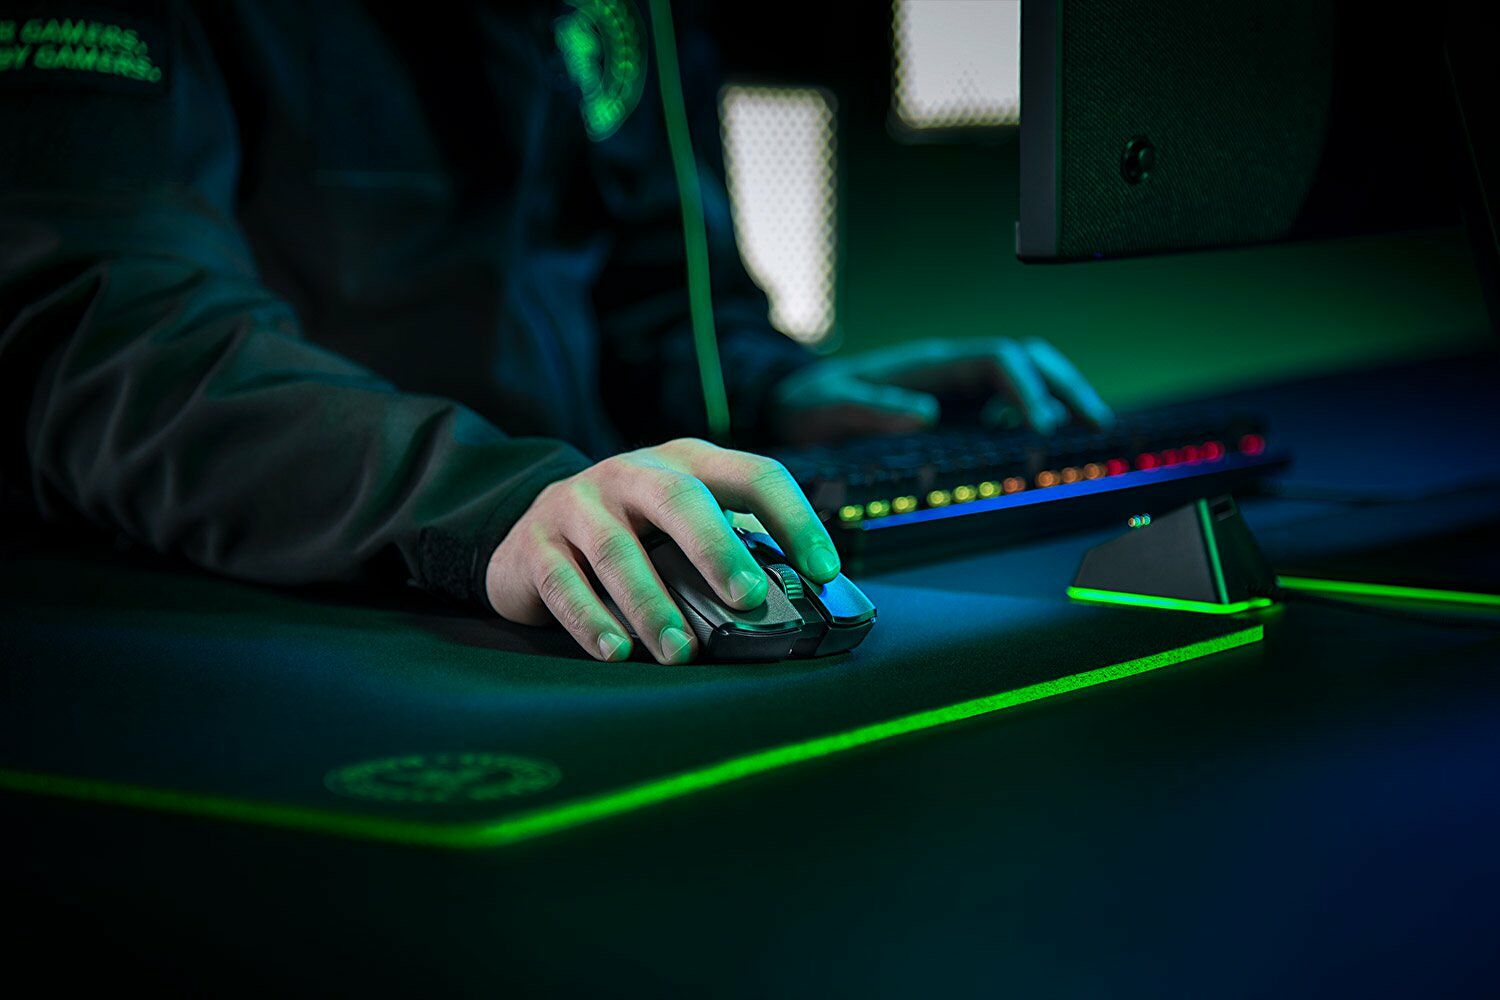 £48 is a ludicrously low price for Razer’s flagship wireless mouse